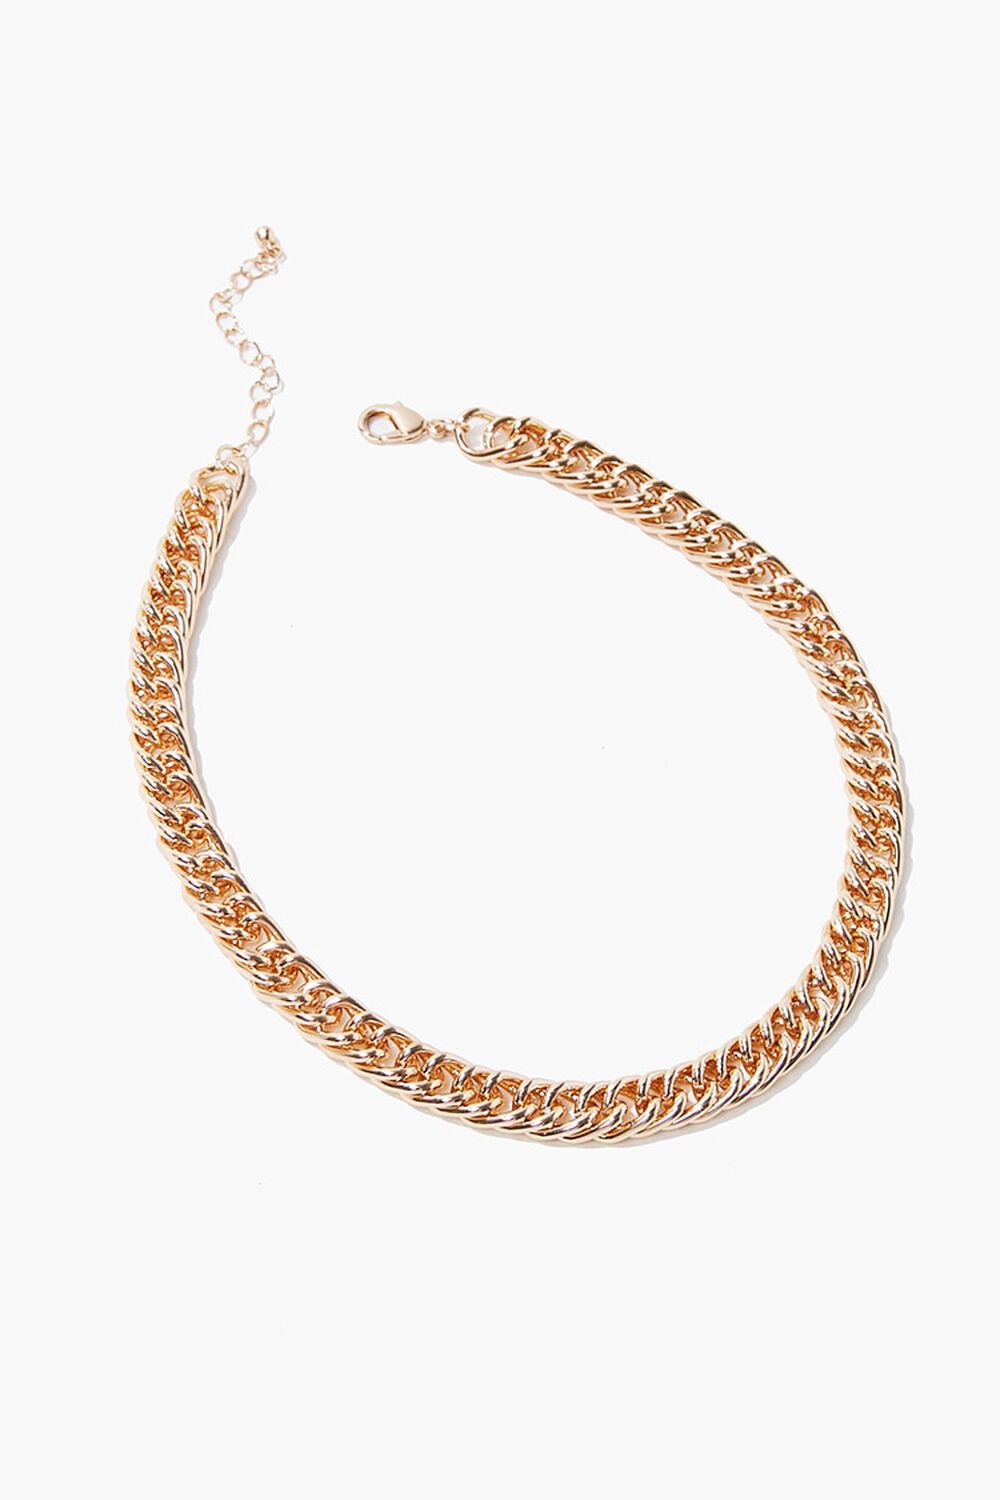 GOLD Chunky Curb Chain Necklace, image 1